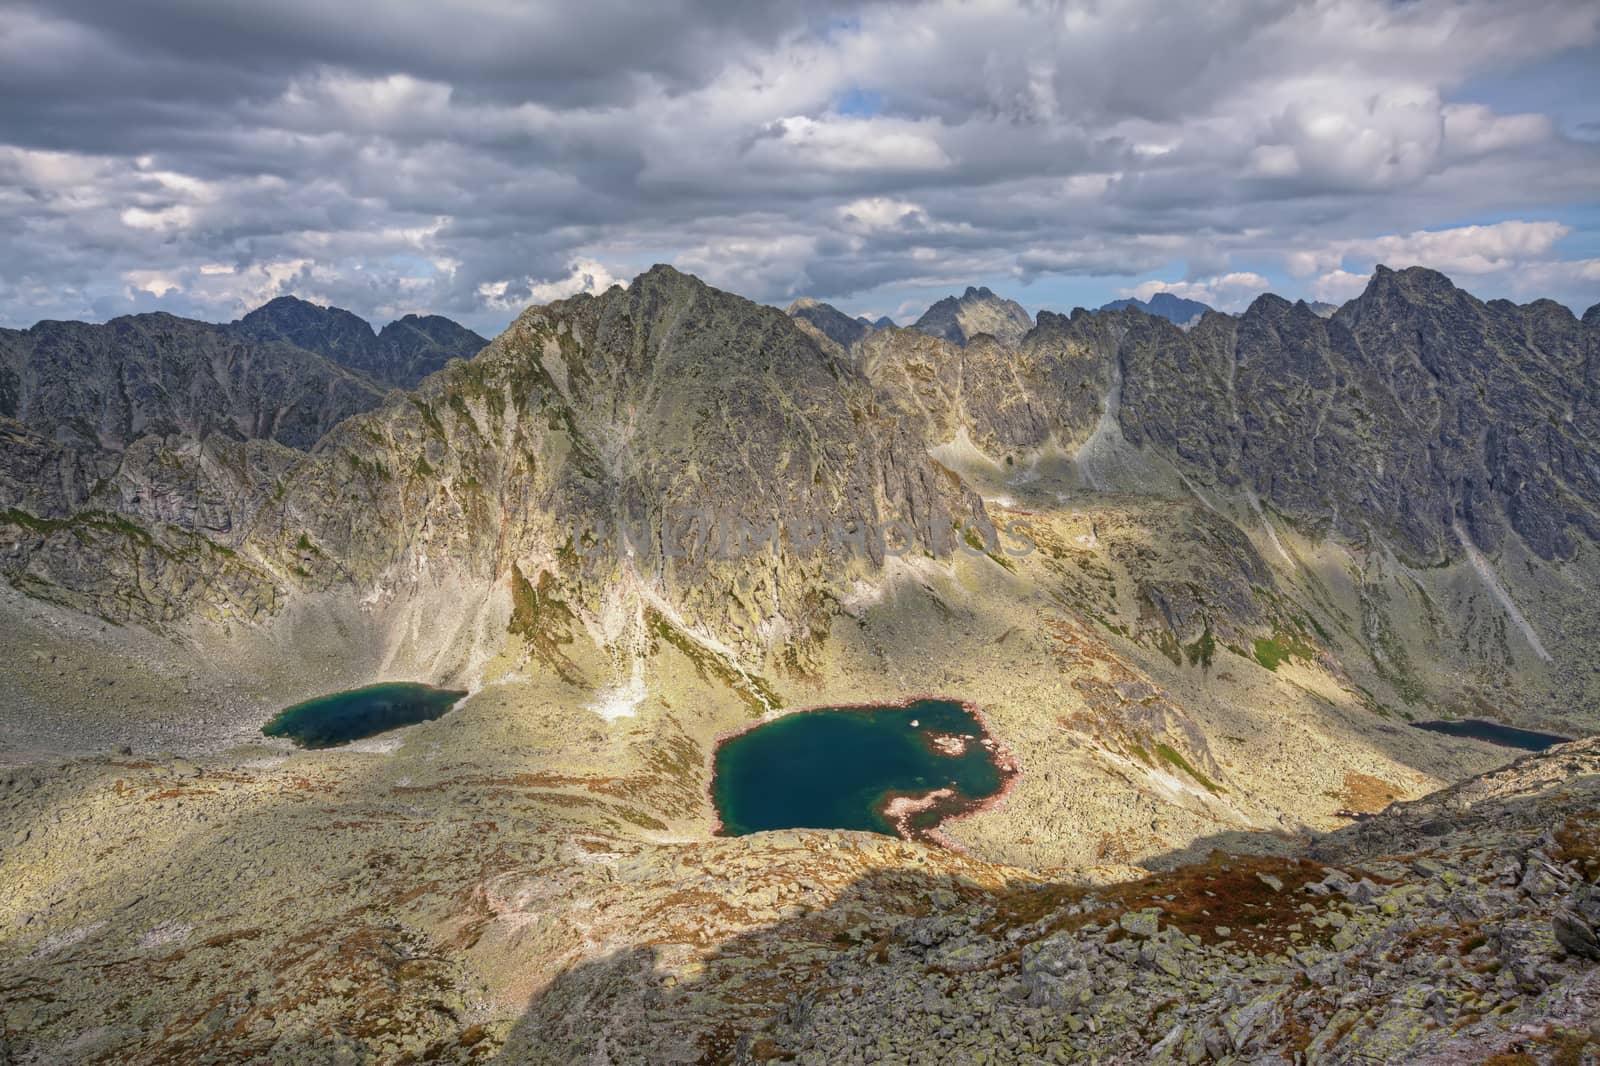 Panoramic photo of Mlynicka dolina and Capie pleso, with a great view on High Tatra mountains.